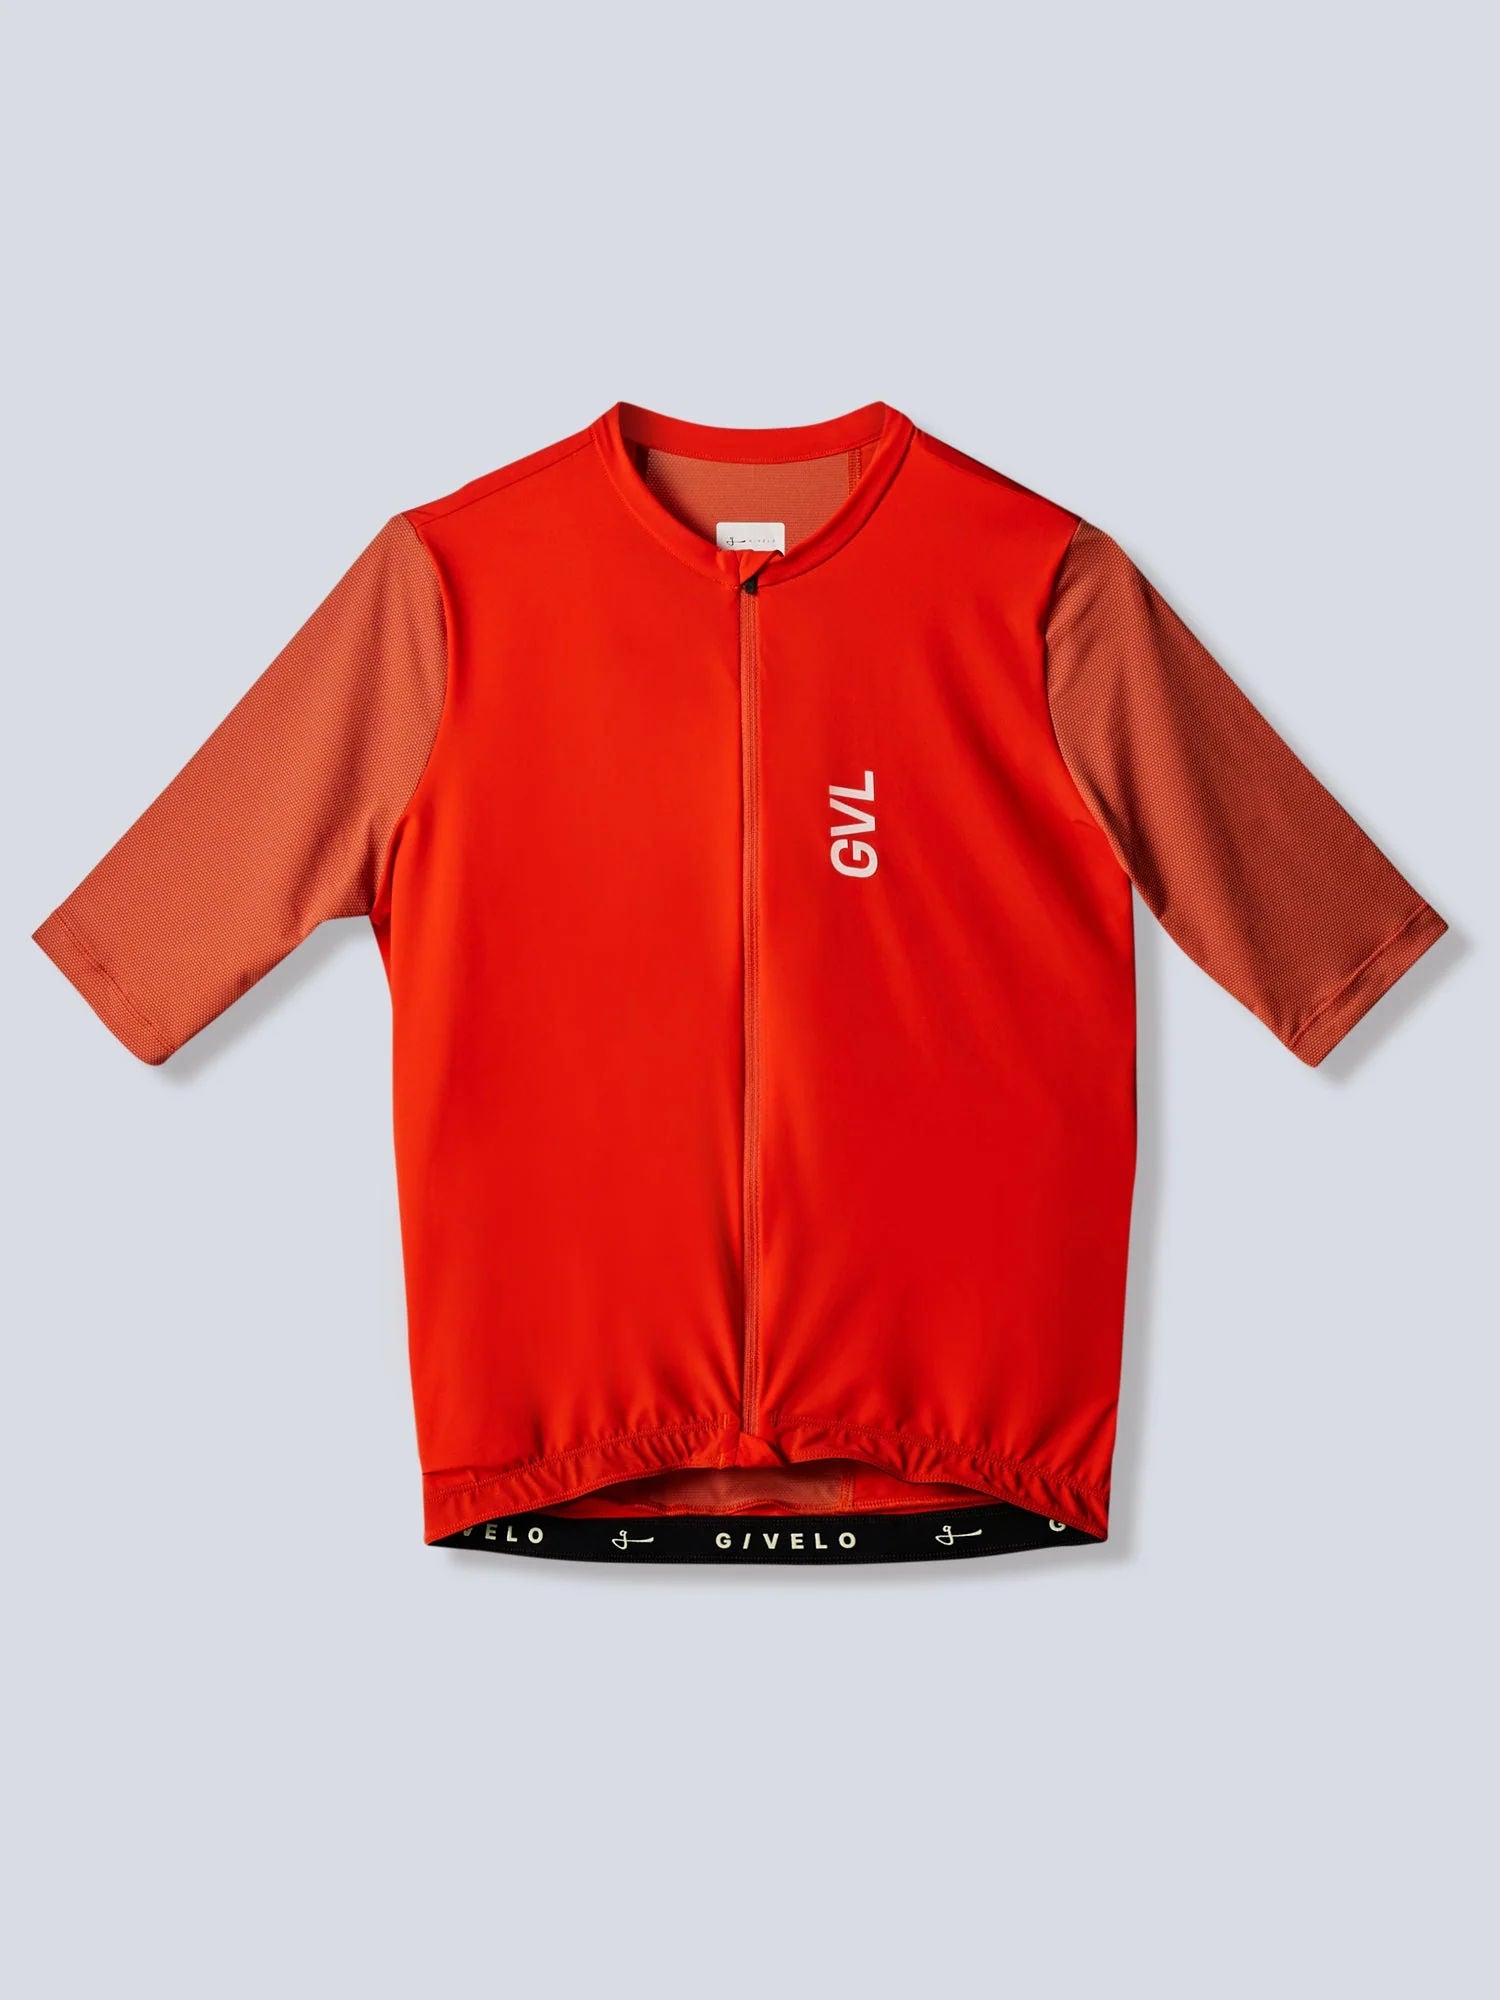 Givelo C.D.A SS TIGER ORANGE メンズ ジャージ｜GEARED